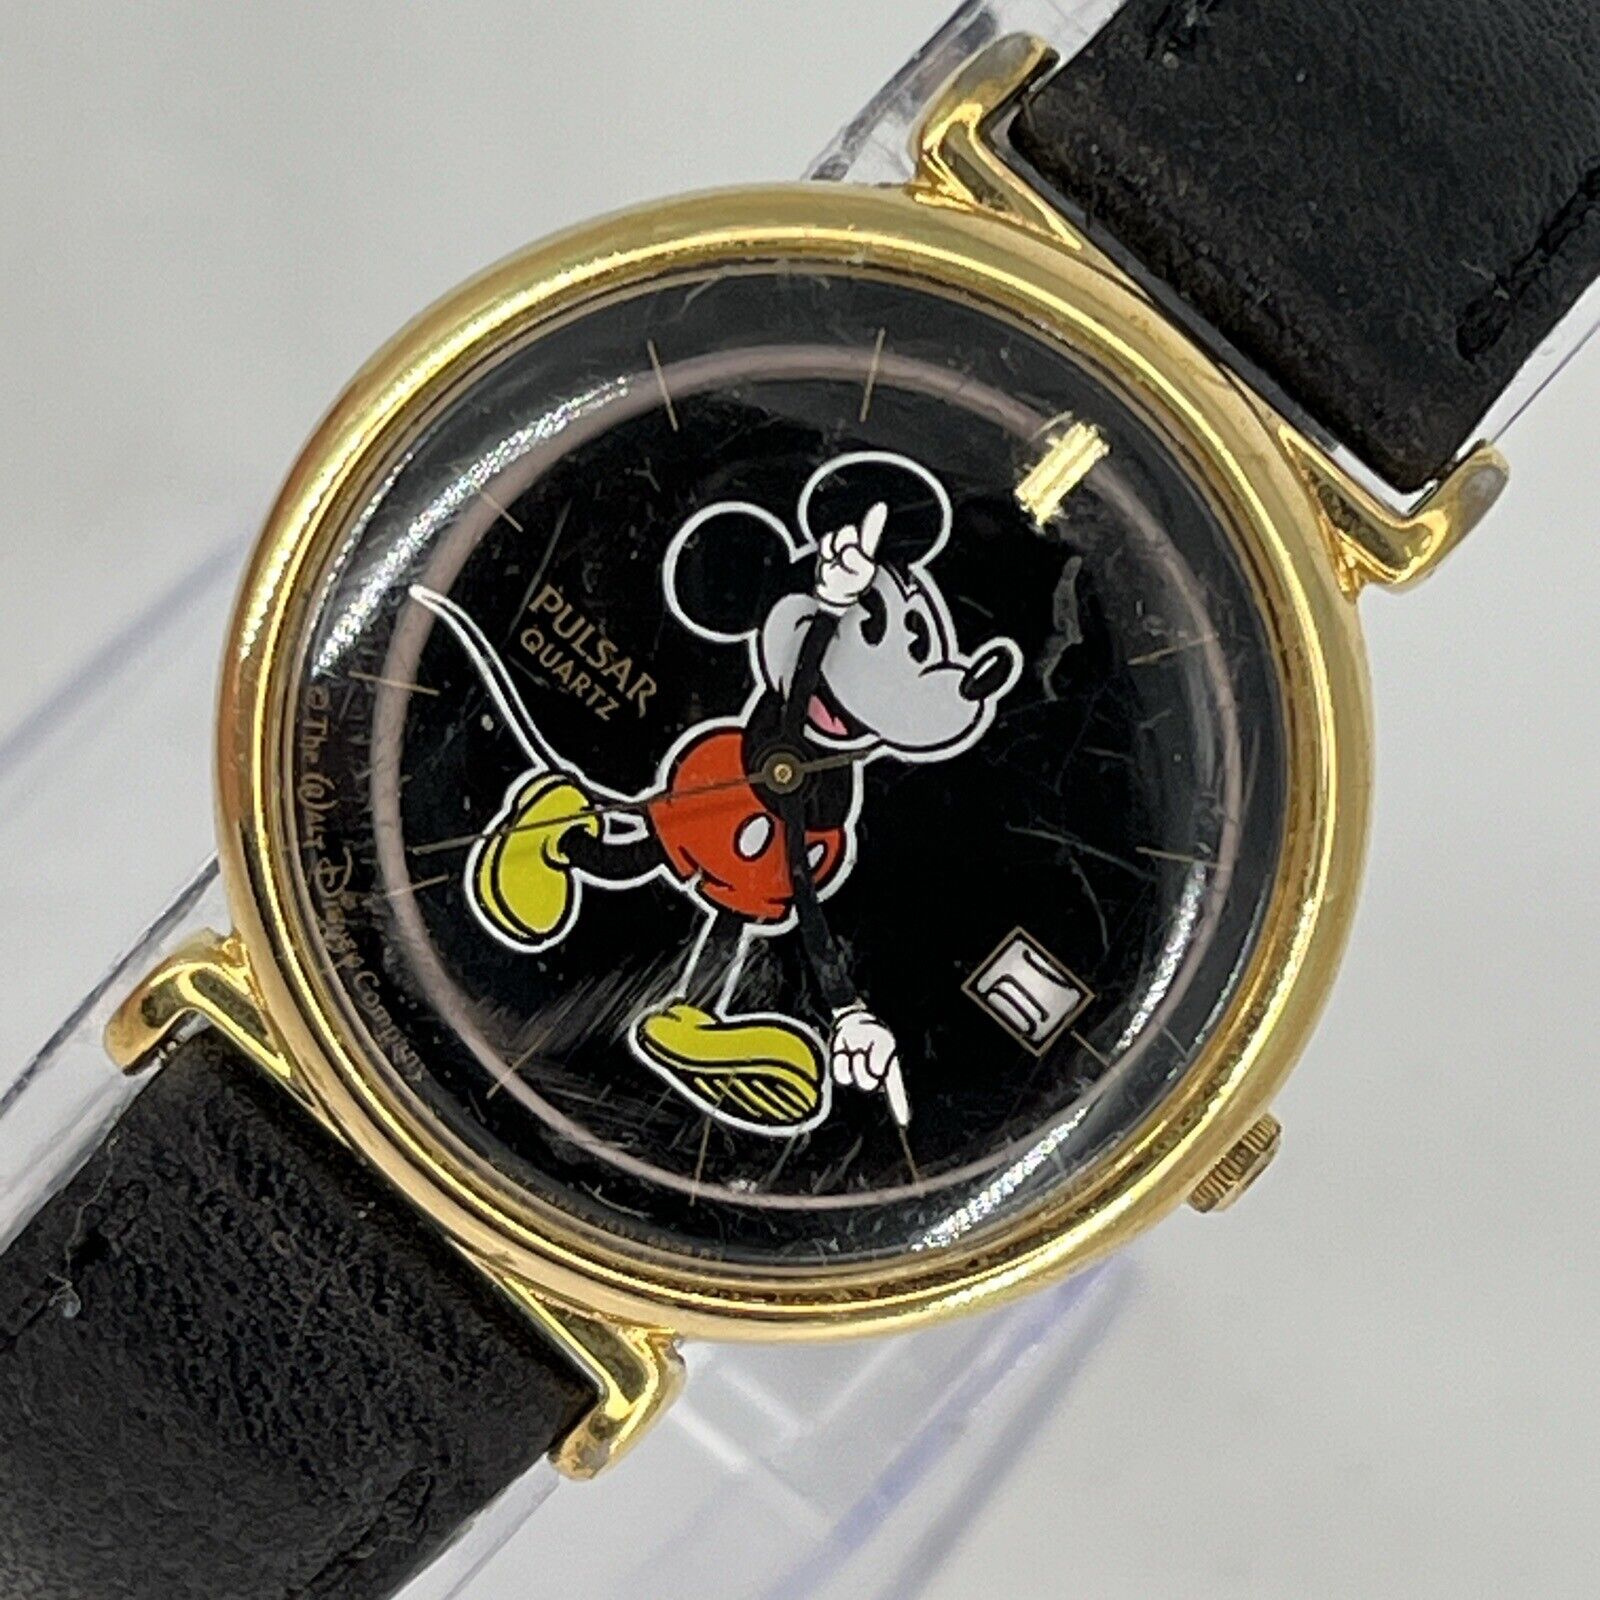 Pulsar Disney 044240 Mickey Mouse Watch Gold Tone Black Leather Band NEW BATTERY